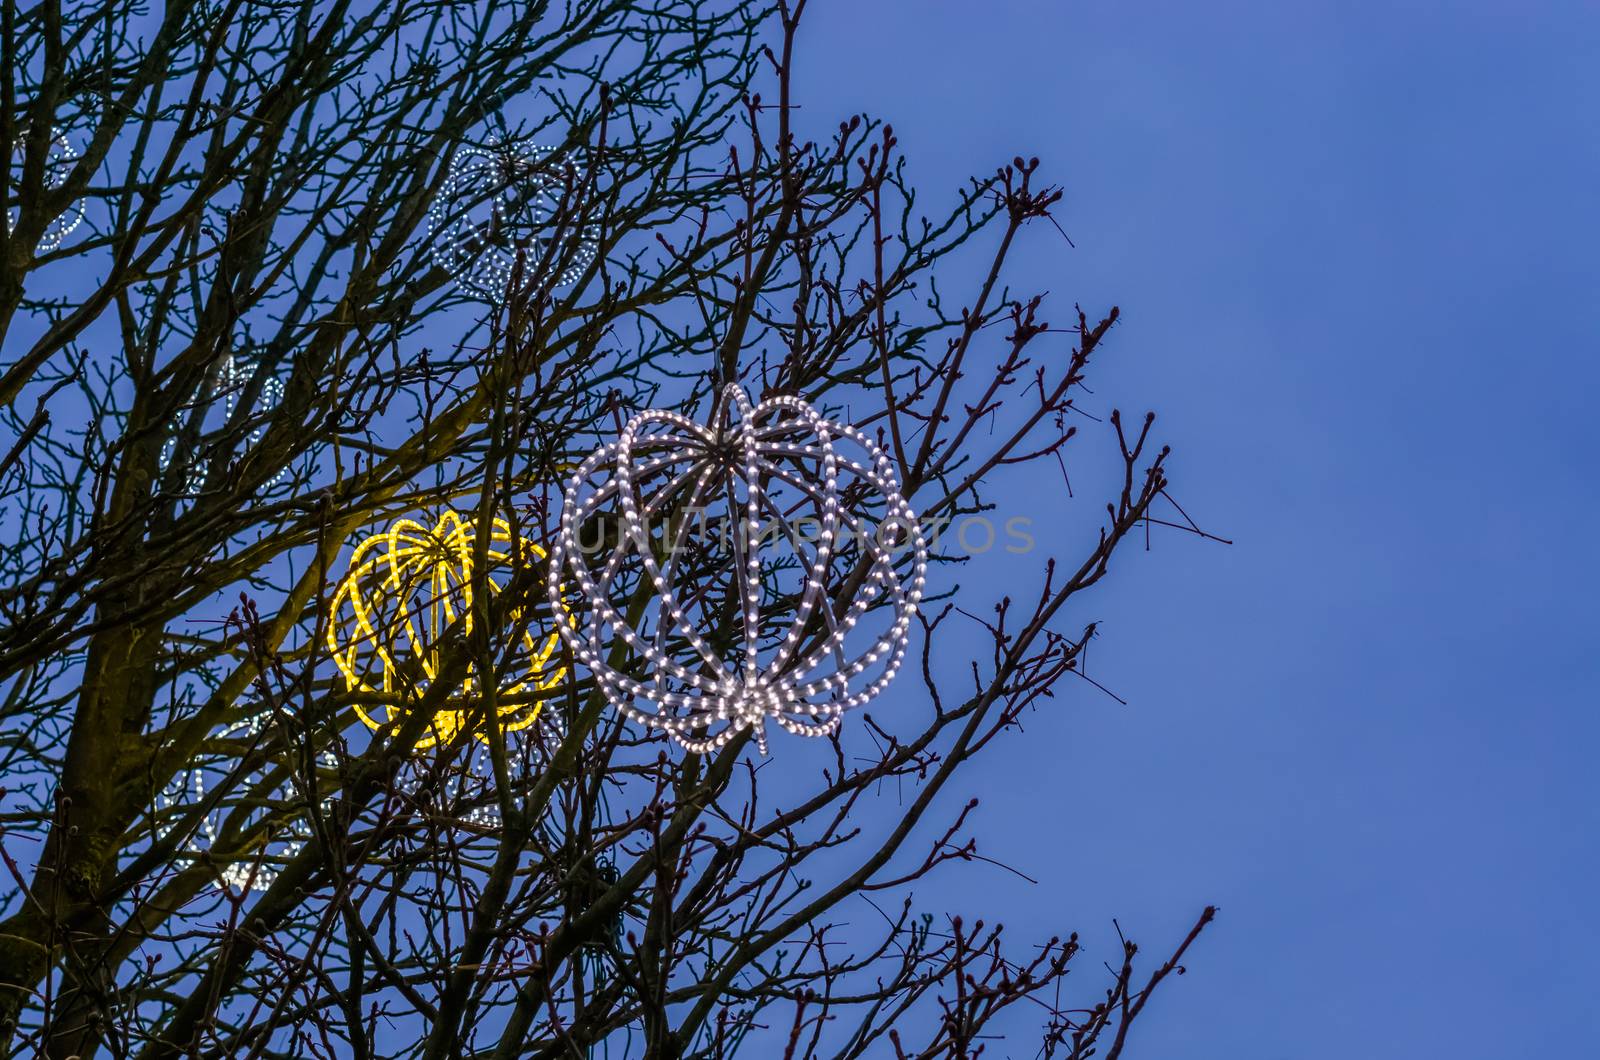 lighted led spheres hanging in the trees, beautiful outdoor winter decorations by charlottebleijenberg